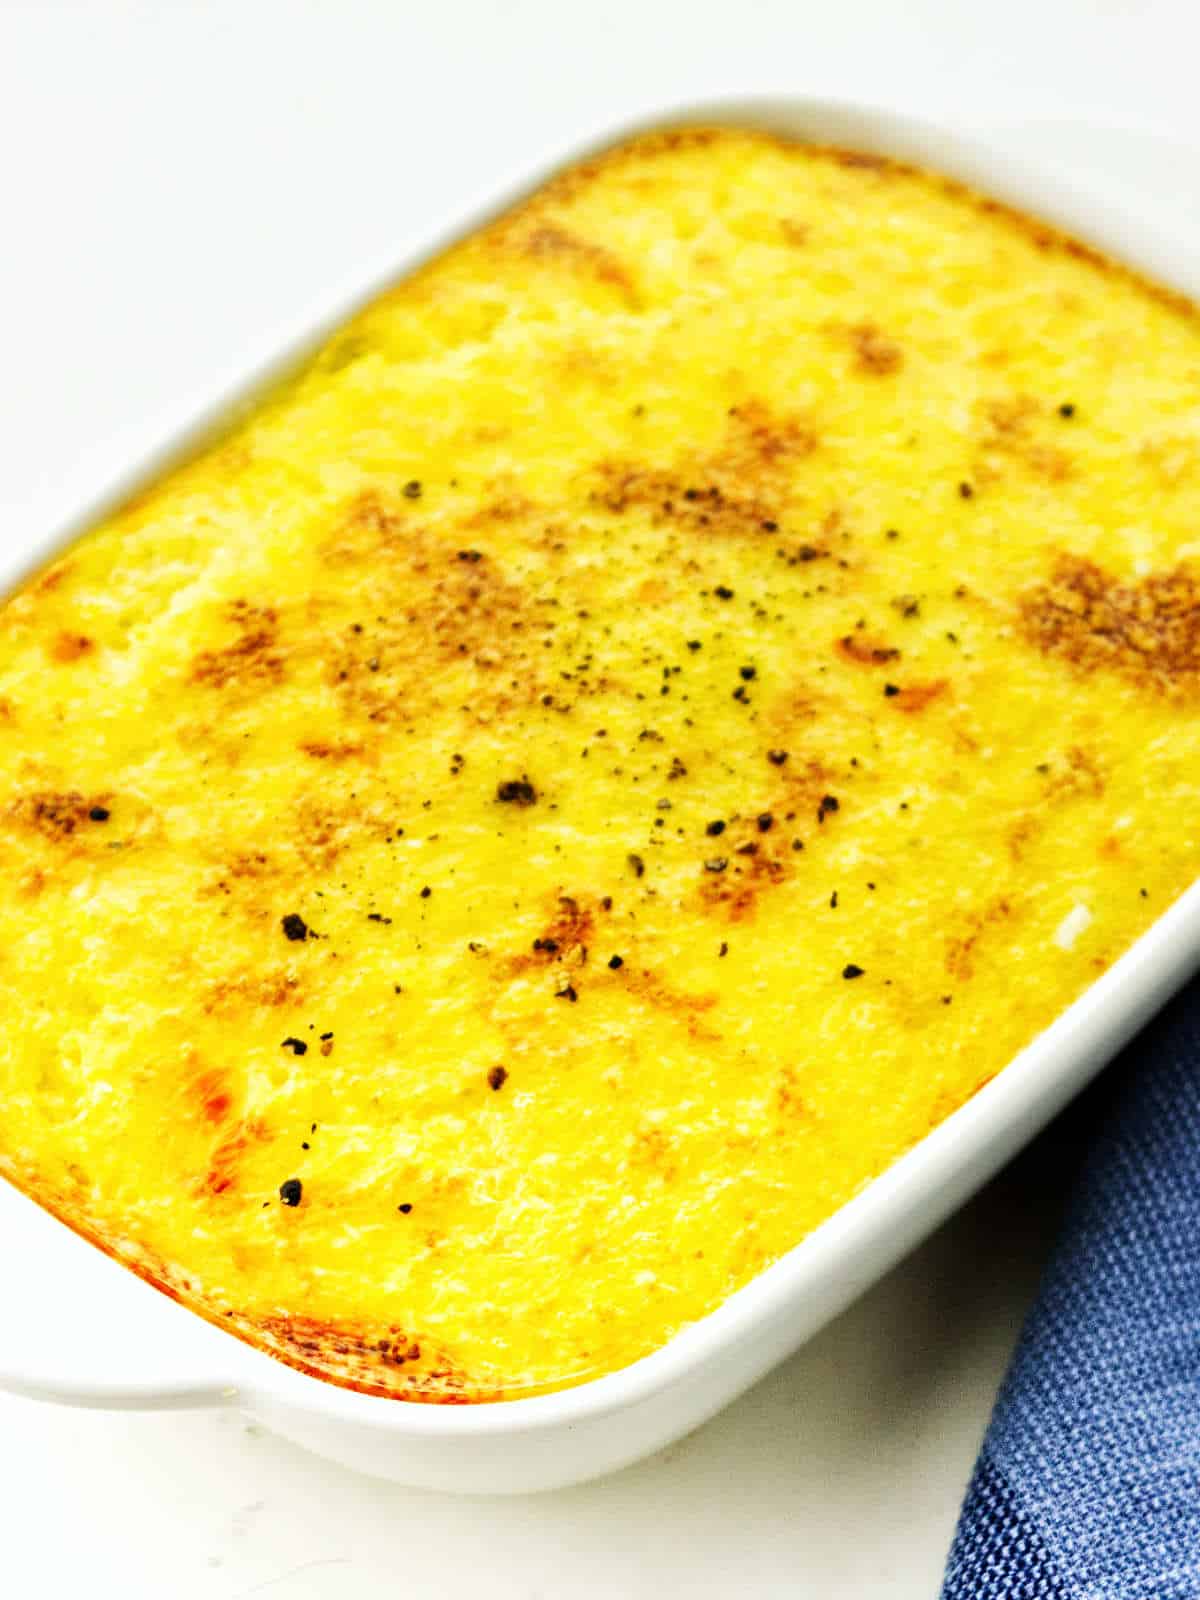 baked grits in a casserole dish.